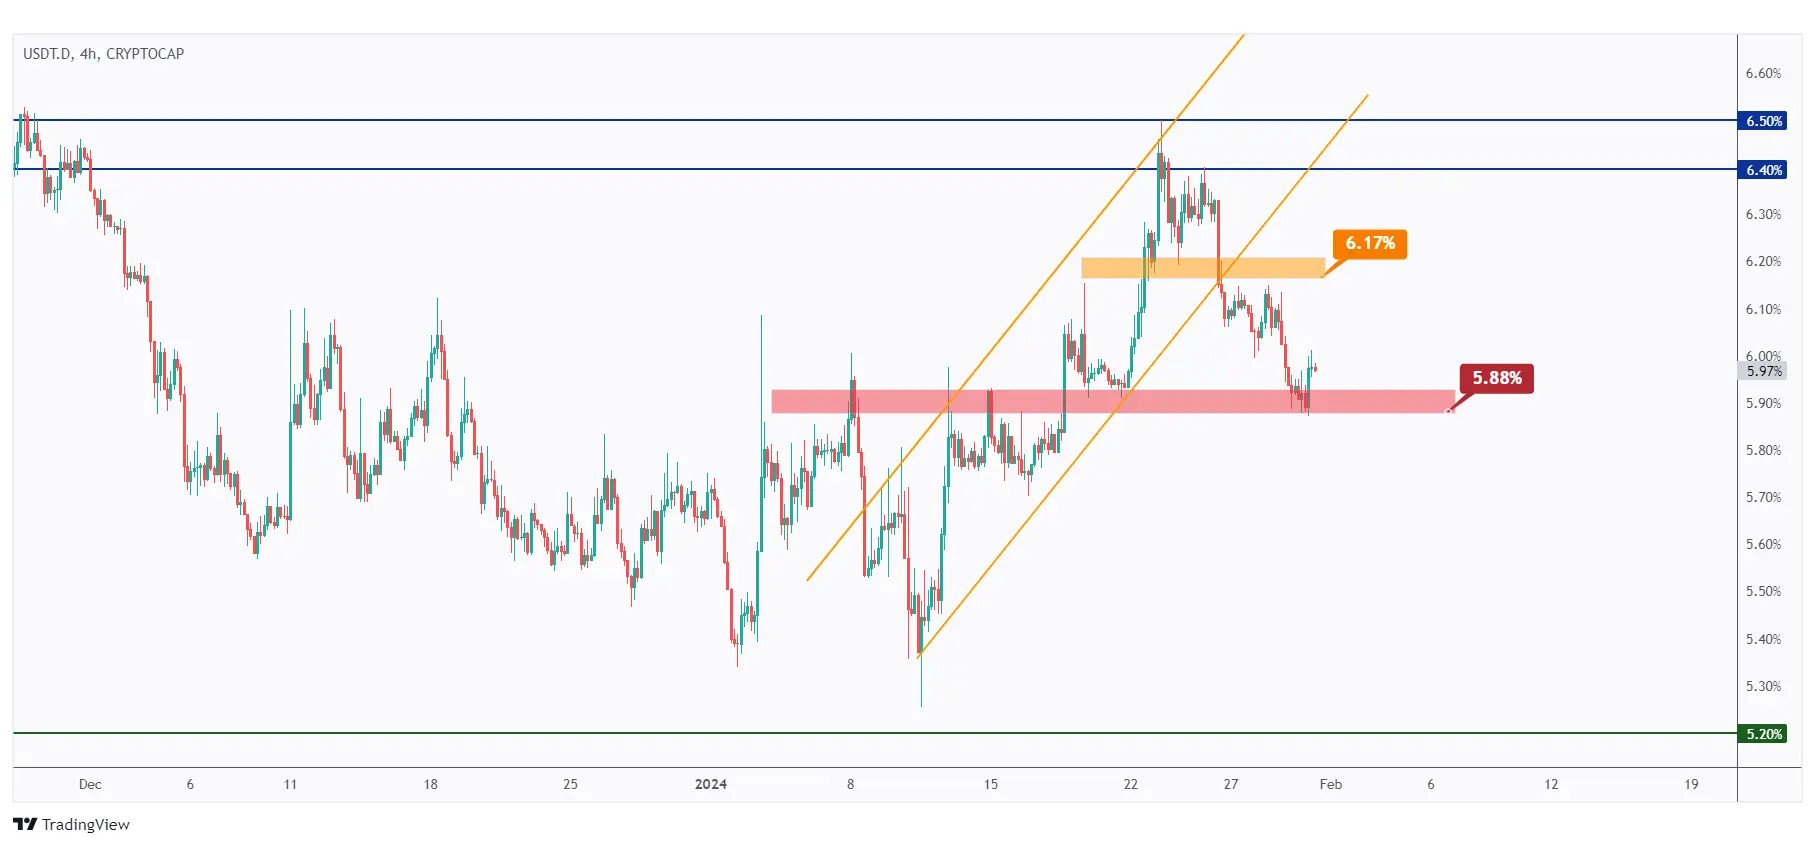 USDT dominance 4h chart showing the shift in momentum from bullish to bearish after breaking below the rising channel.